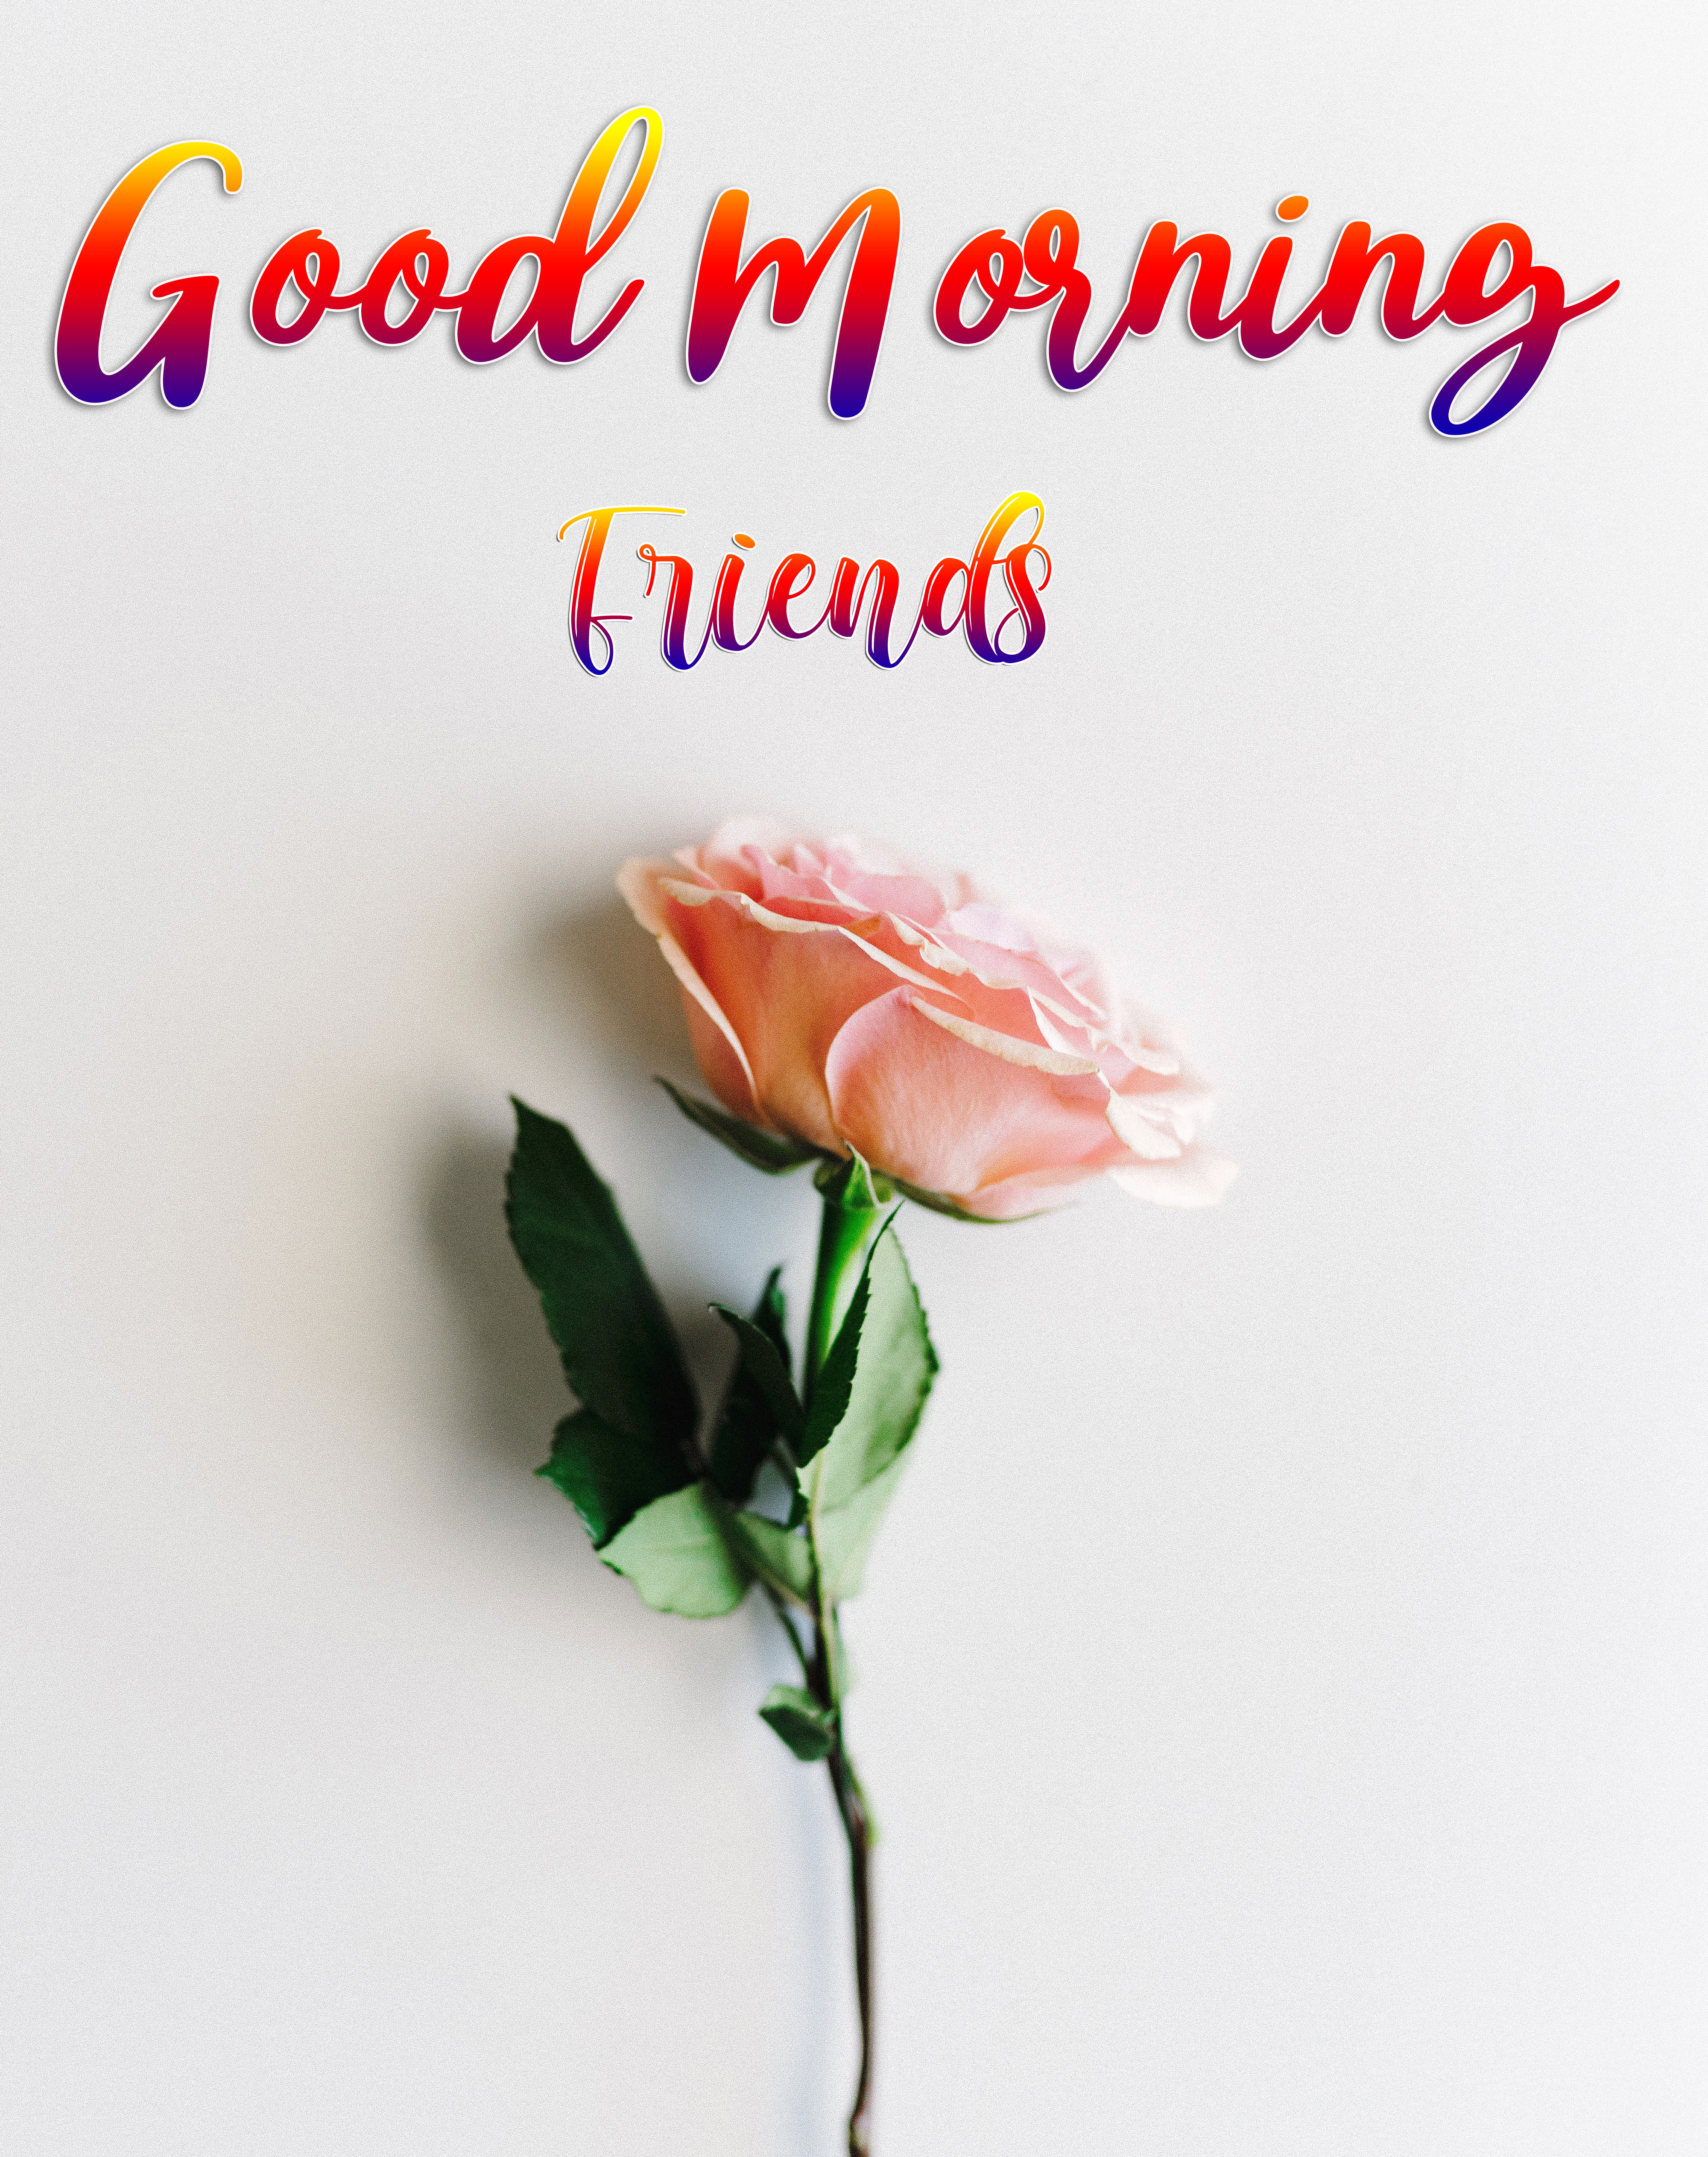 Good Morning Images Free Download For Whatsapp HD Download